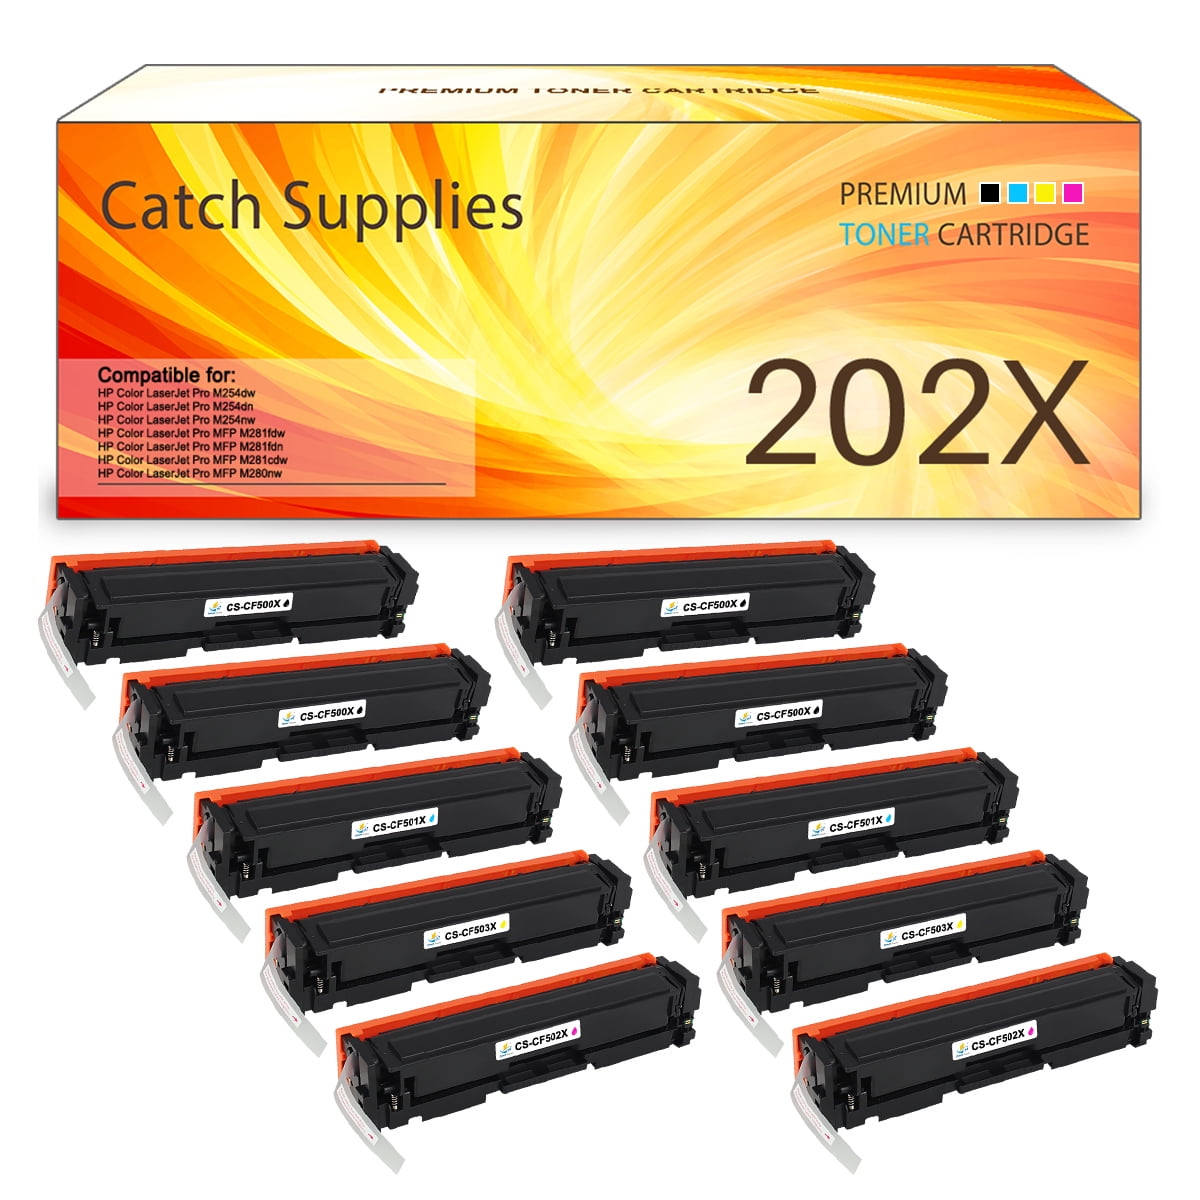 stof Mos Optøjer Catch Supplies 10-Pack Compatible Toner Replacement for HP 202X CF500X  Color LaserJet Pro M254dw M254dn M254nw MFP M281fdw M280nw Printer Ink  (4*Black, 2*Cyan, 2*Magenta, 2*Yellow) - Walmart.com